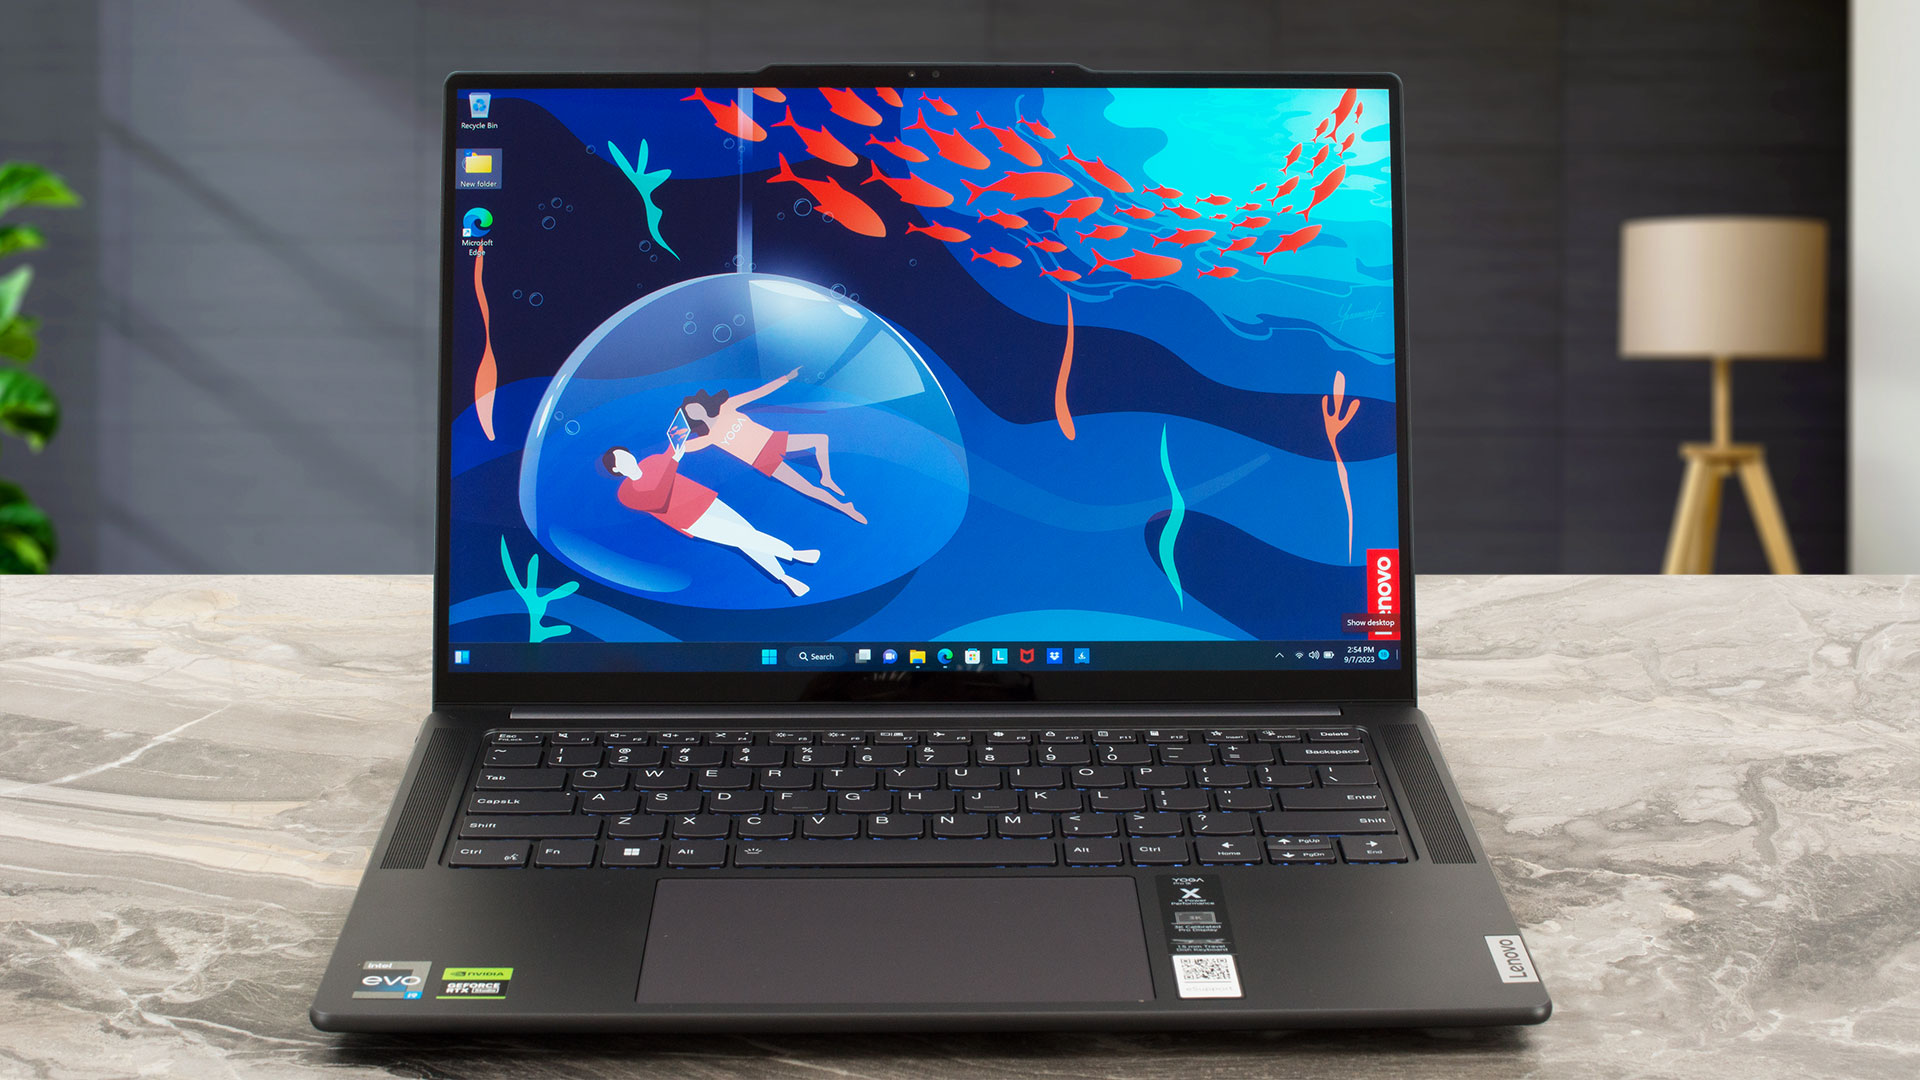 Lenovo Yoga Pro 9i (14, Gen 8) review - top-tier machine with